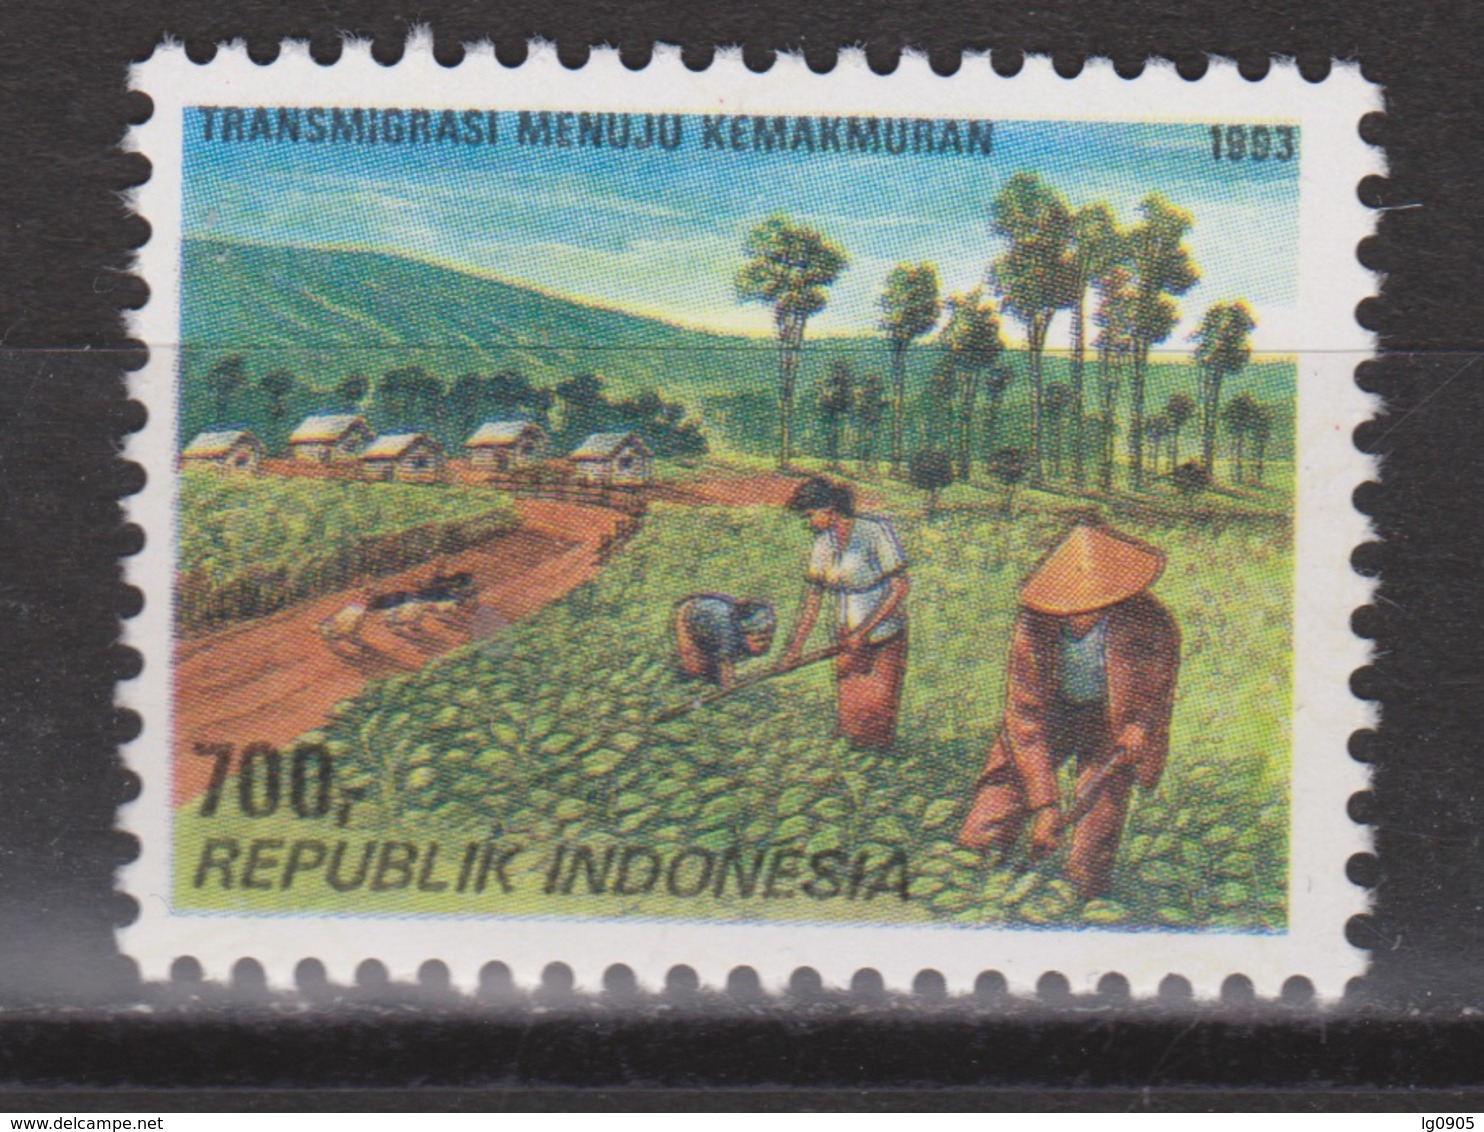 Indonesie 1571 MNH ; Stimulering Transmigatie 1993 NOW MANY STAMPS INDONESIA VERY CHEAP - Indonesië